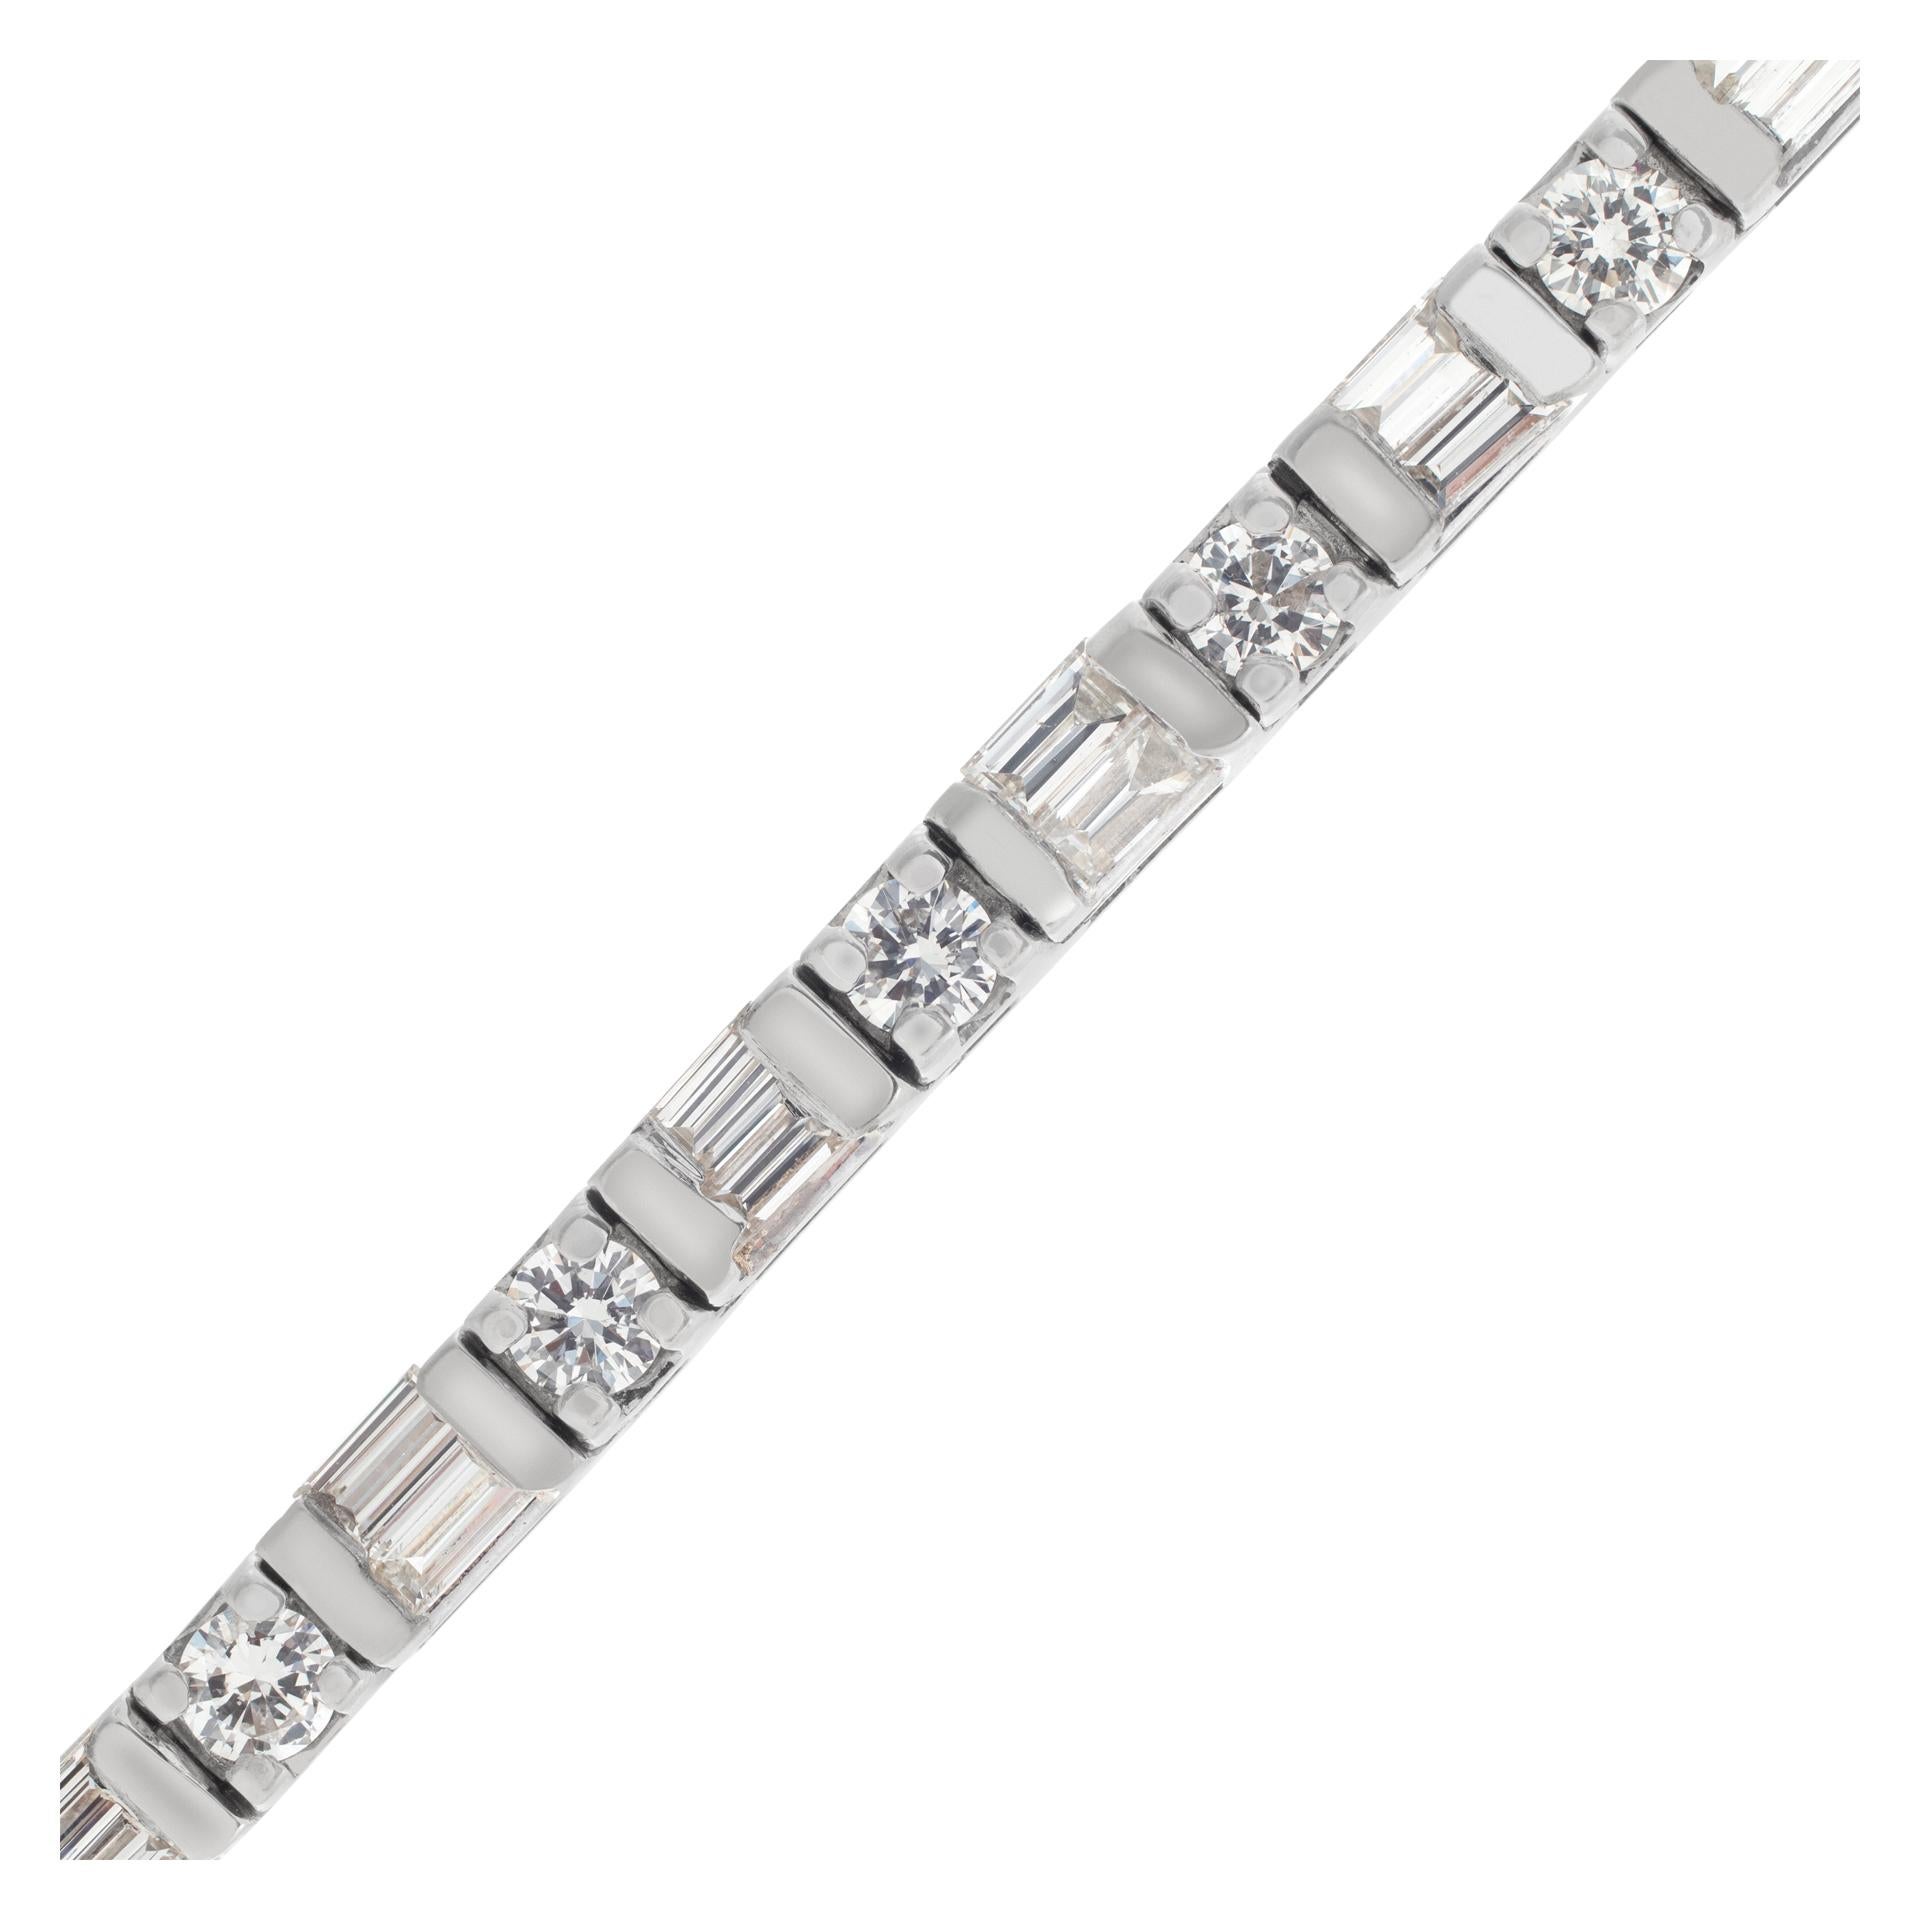 Diamond line bracelet in 14k white gold with over 2 carats in round and baguette cut G-H color, VS-SI clarity  diamonds. Fit for 7 inch wrist, measures 3mm thick.
